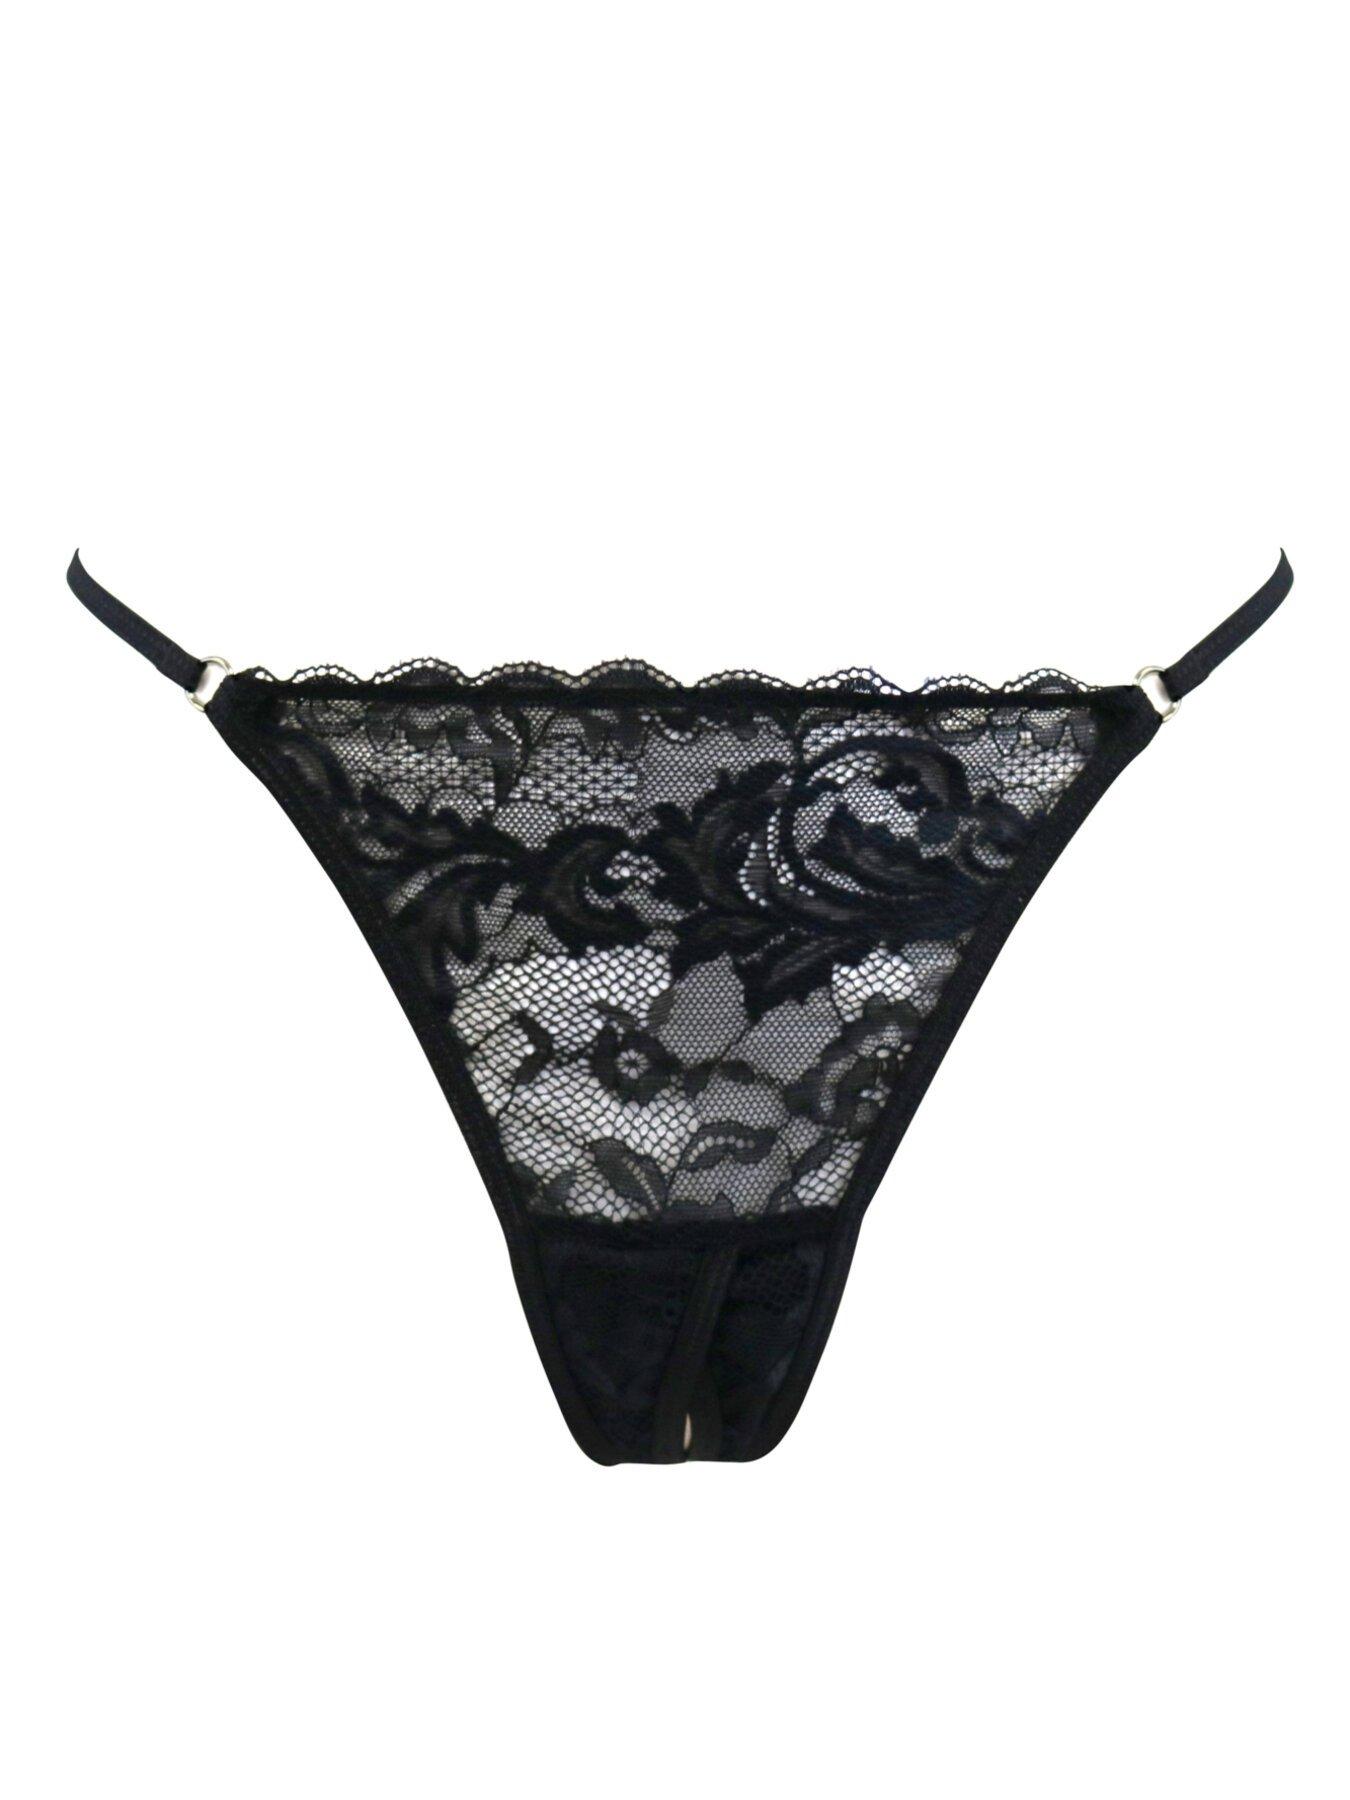 For Your Eyes Only Crotchless Thong, Pour Moi, For Your Eyes Only Crotchless  Thong, Black